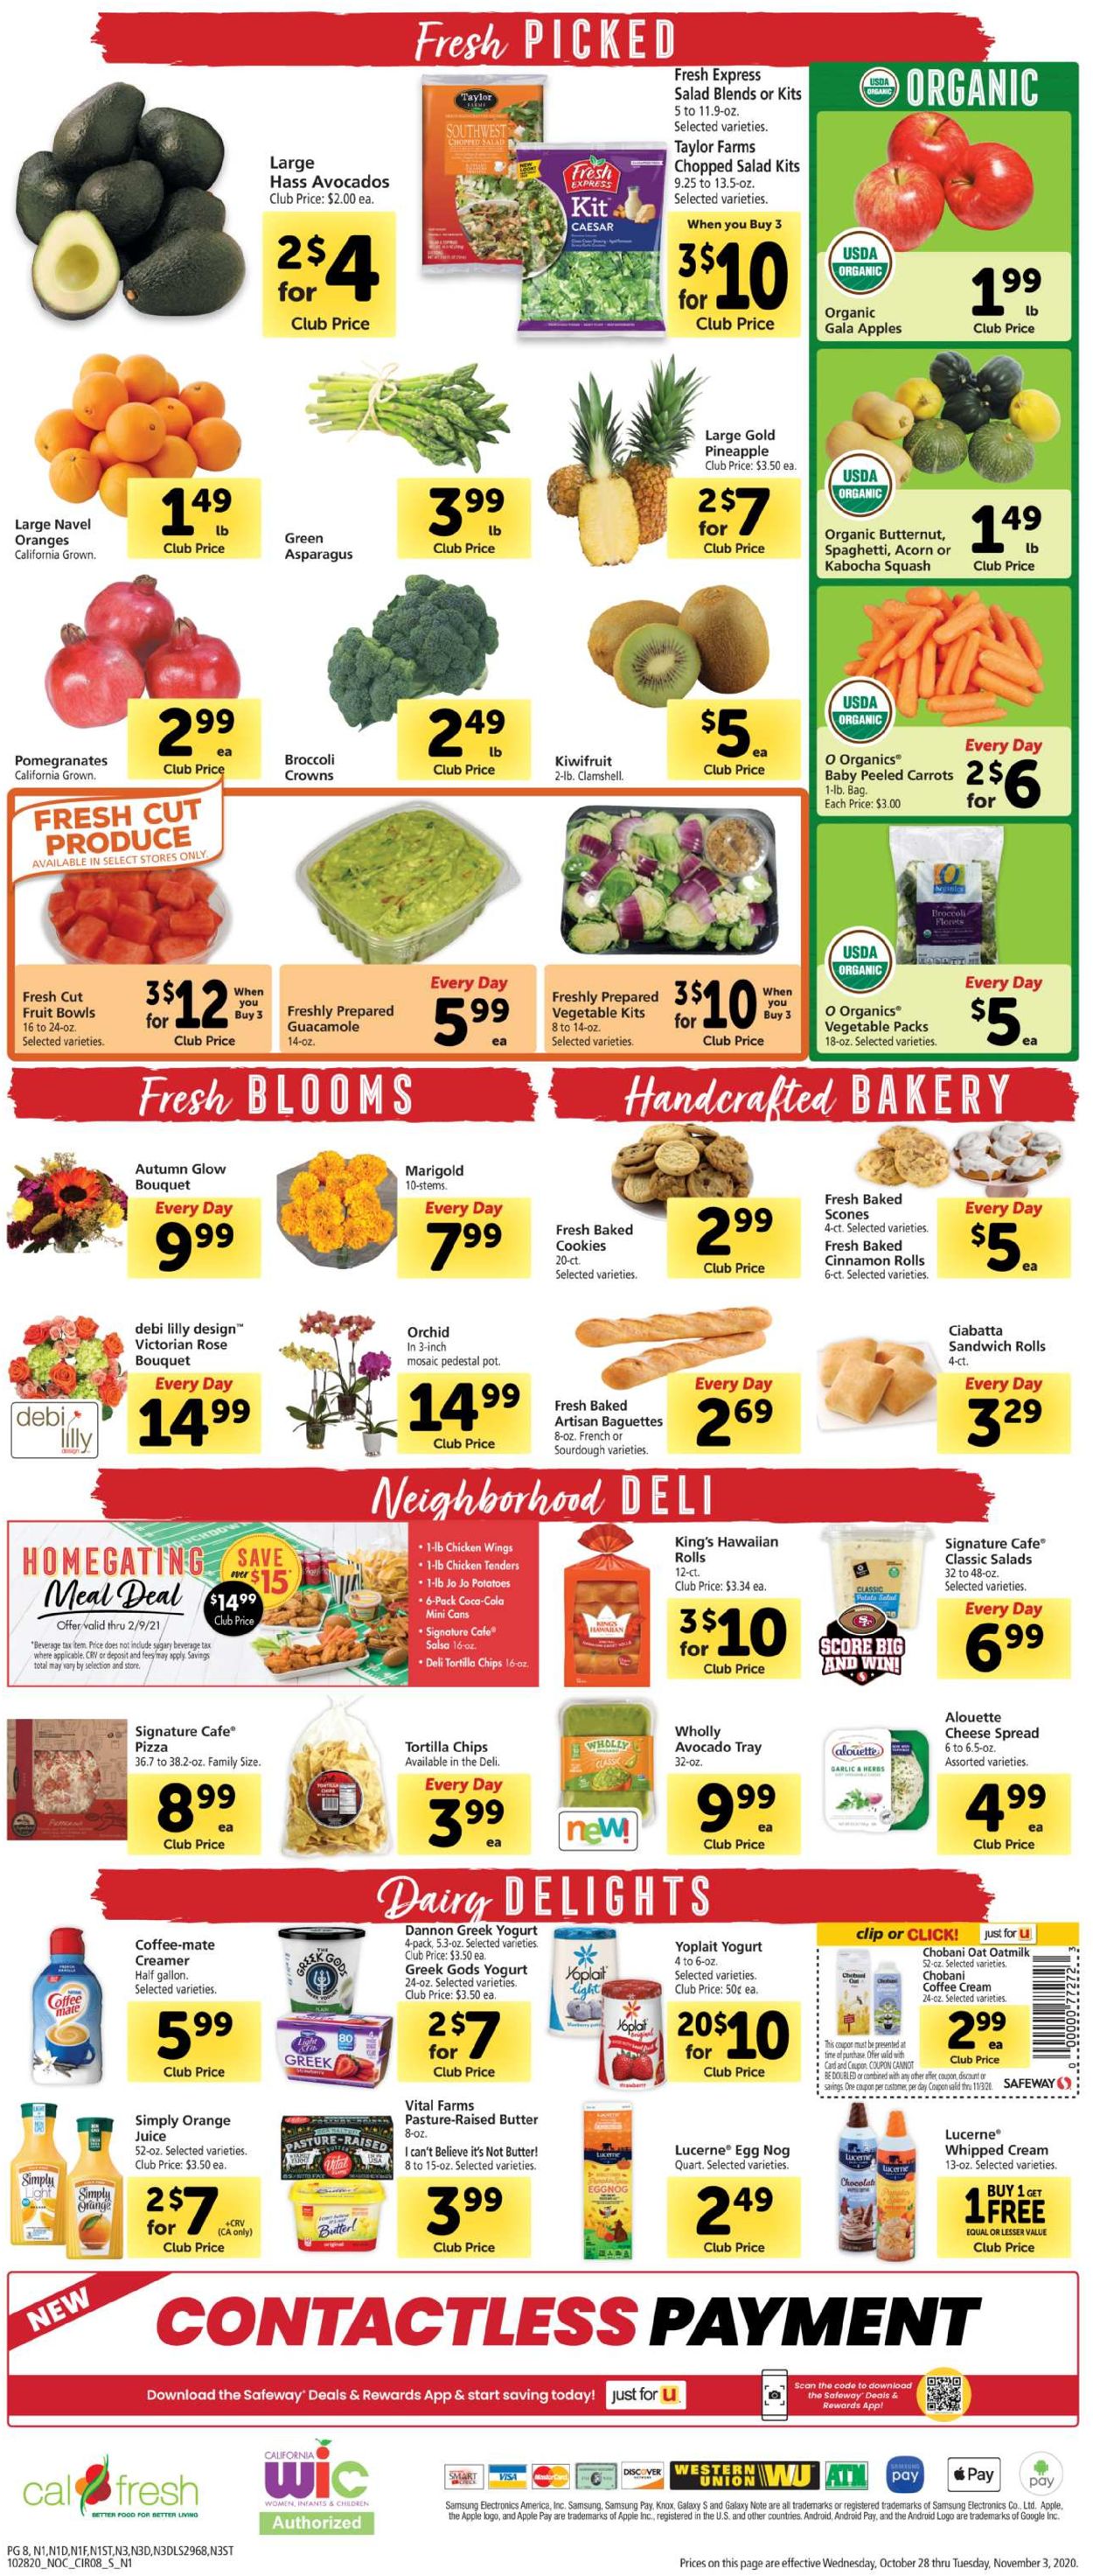 Safeway Ad from 10/28/2020